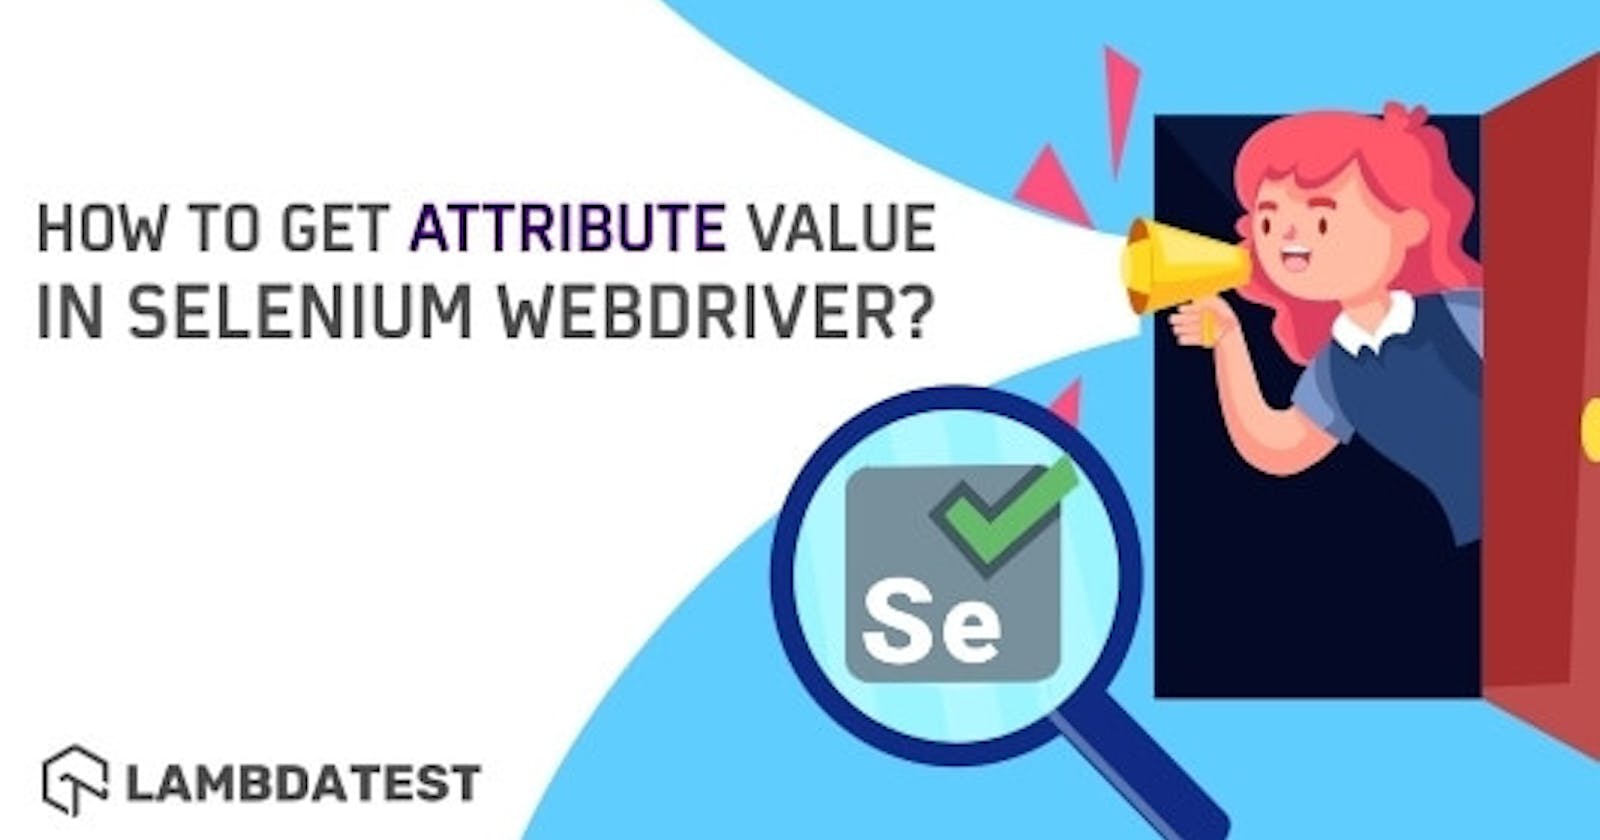 How To Get Attribute Value In Selenium WebDriver?